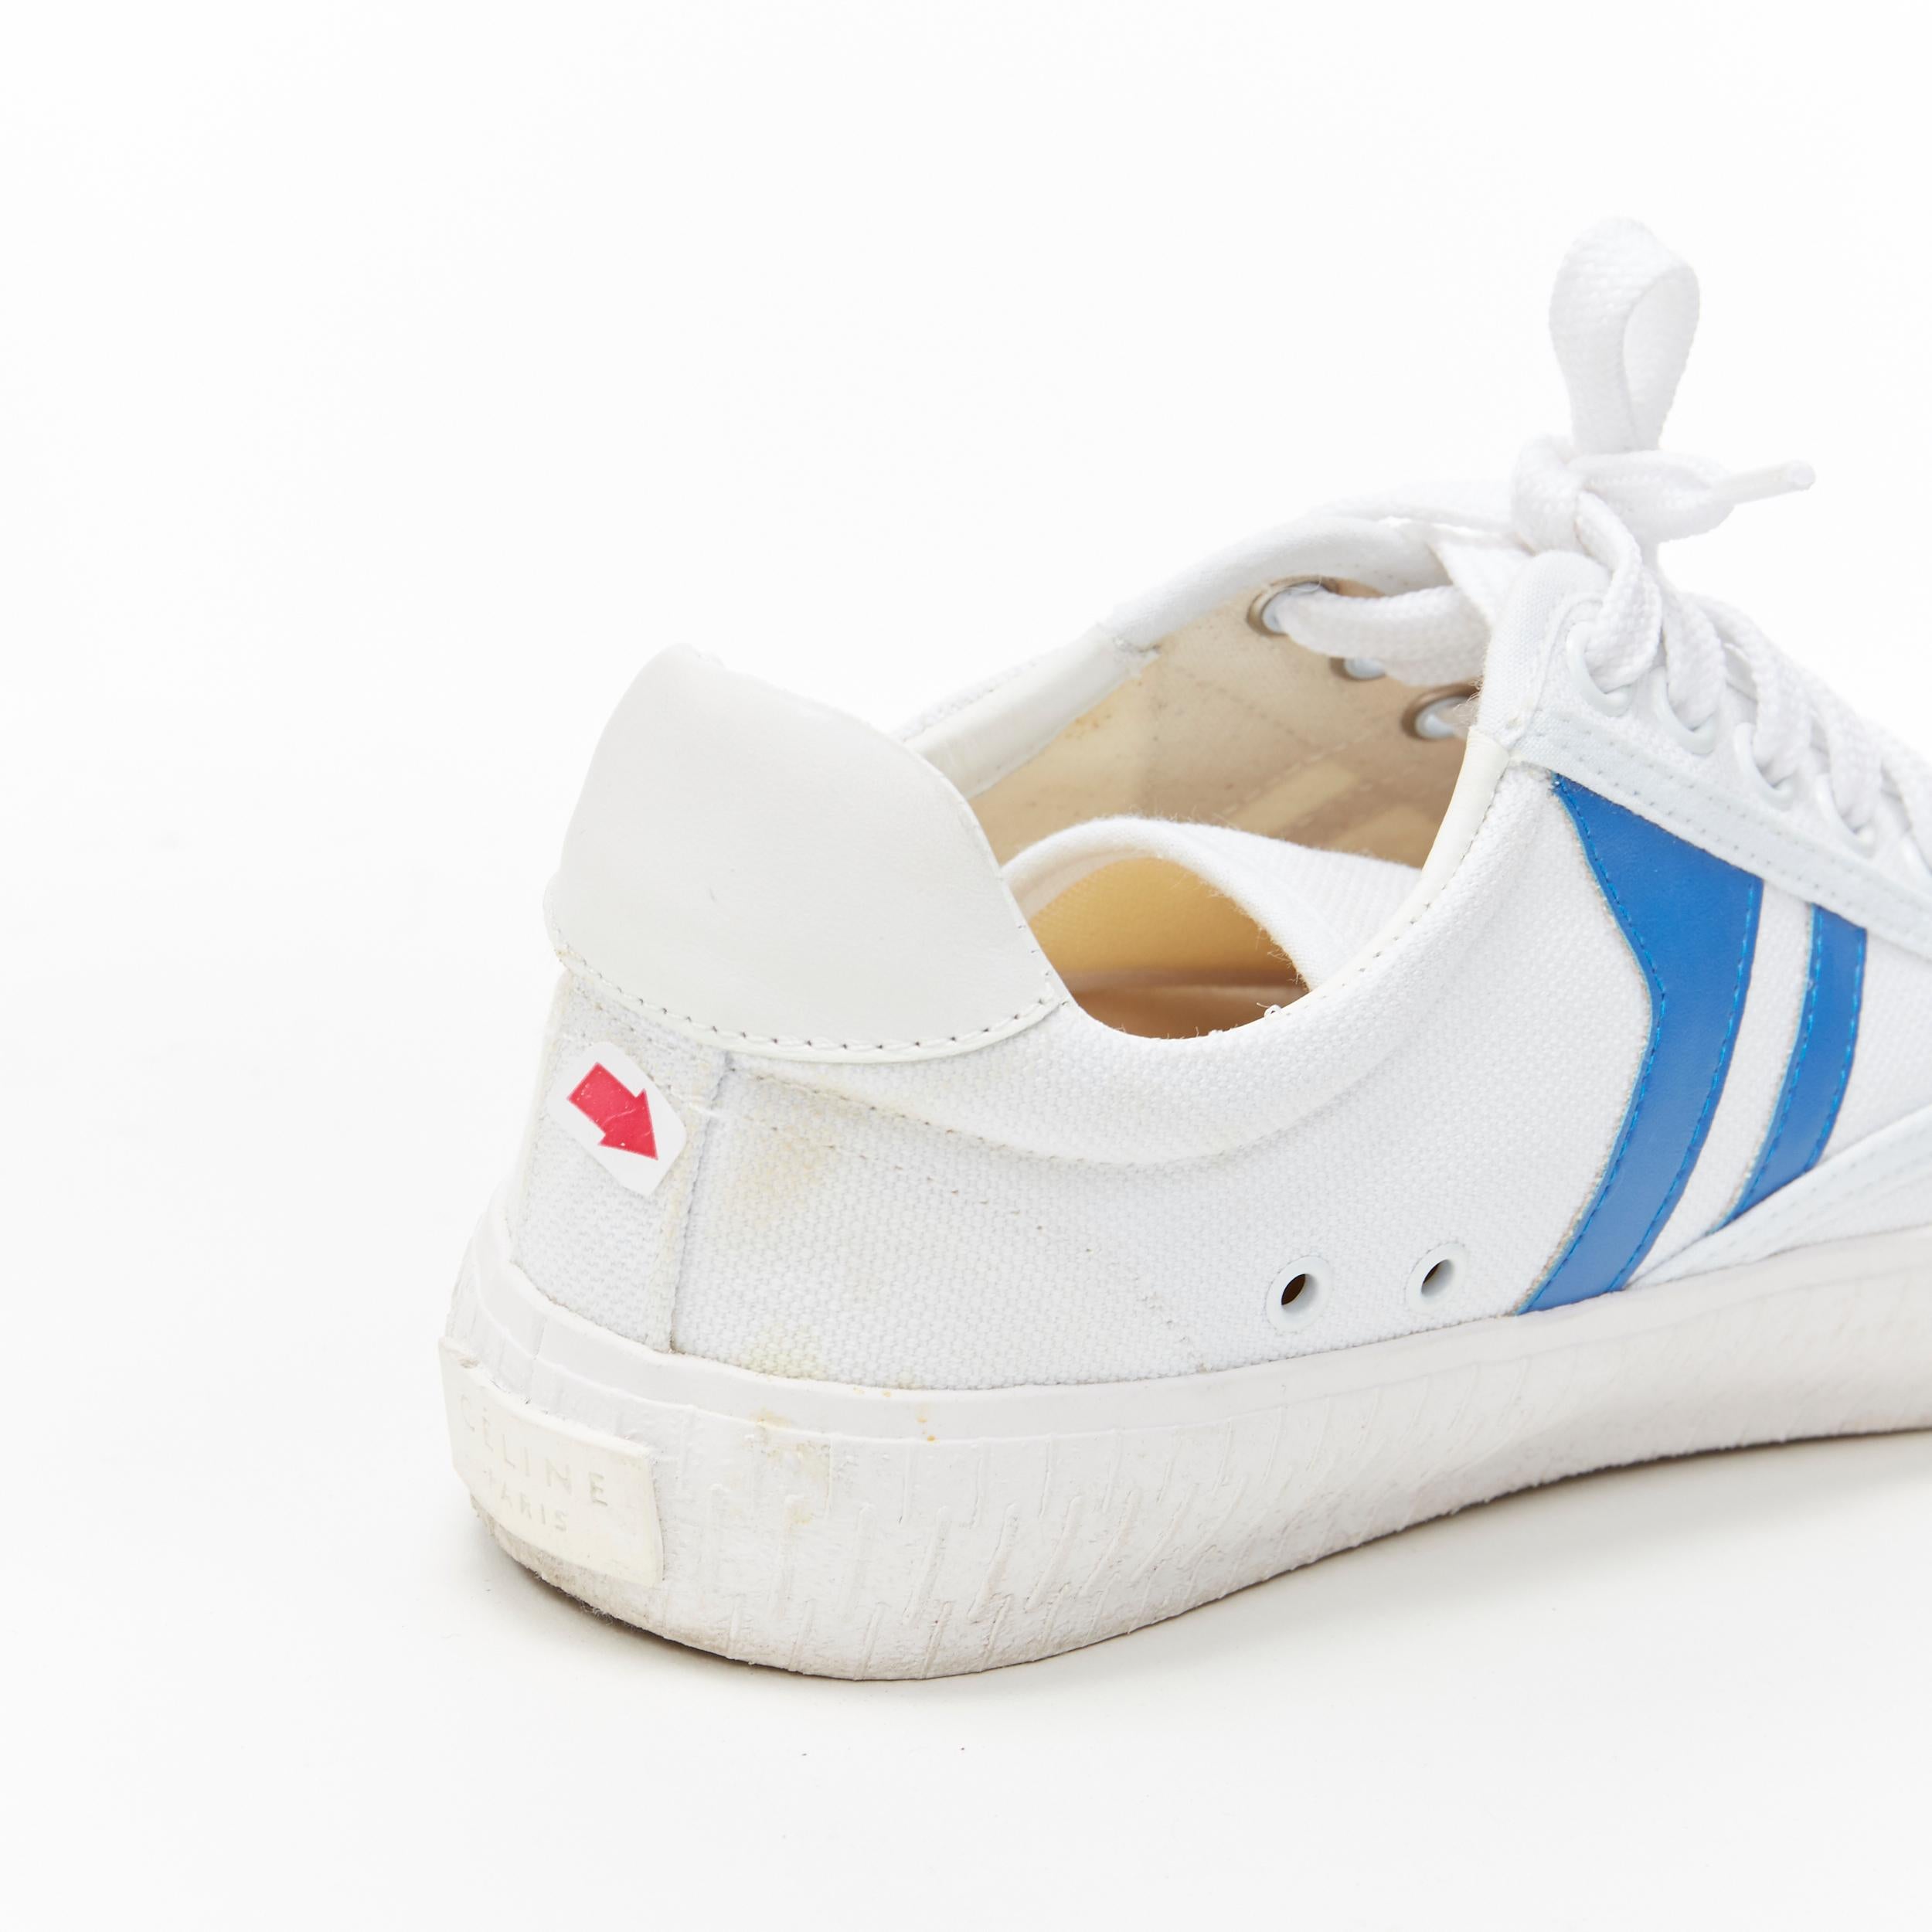 OLD CELINE white blue graphic canvas lace up casusal low top sneakers EU38 2